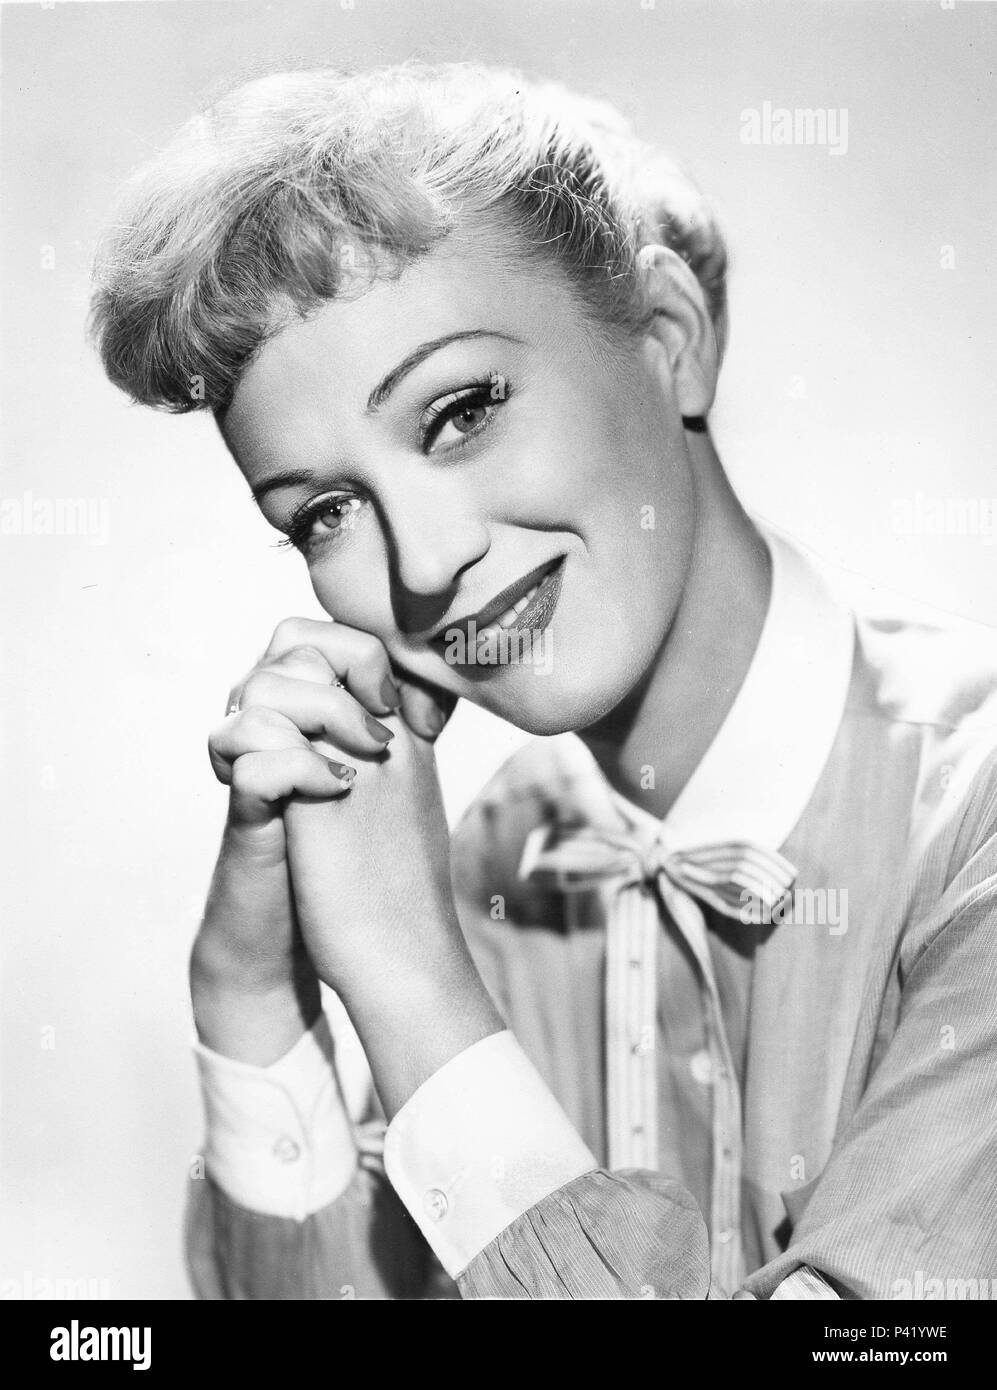 8x10 In B&W Glossy Photo Our Miss Brooks Eve Arden 1950s TV 